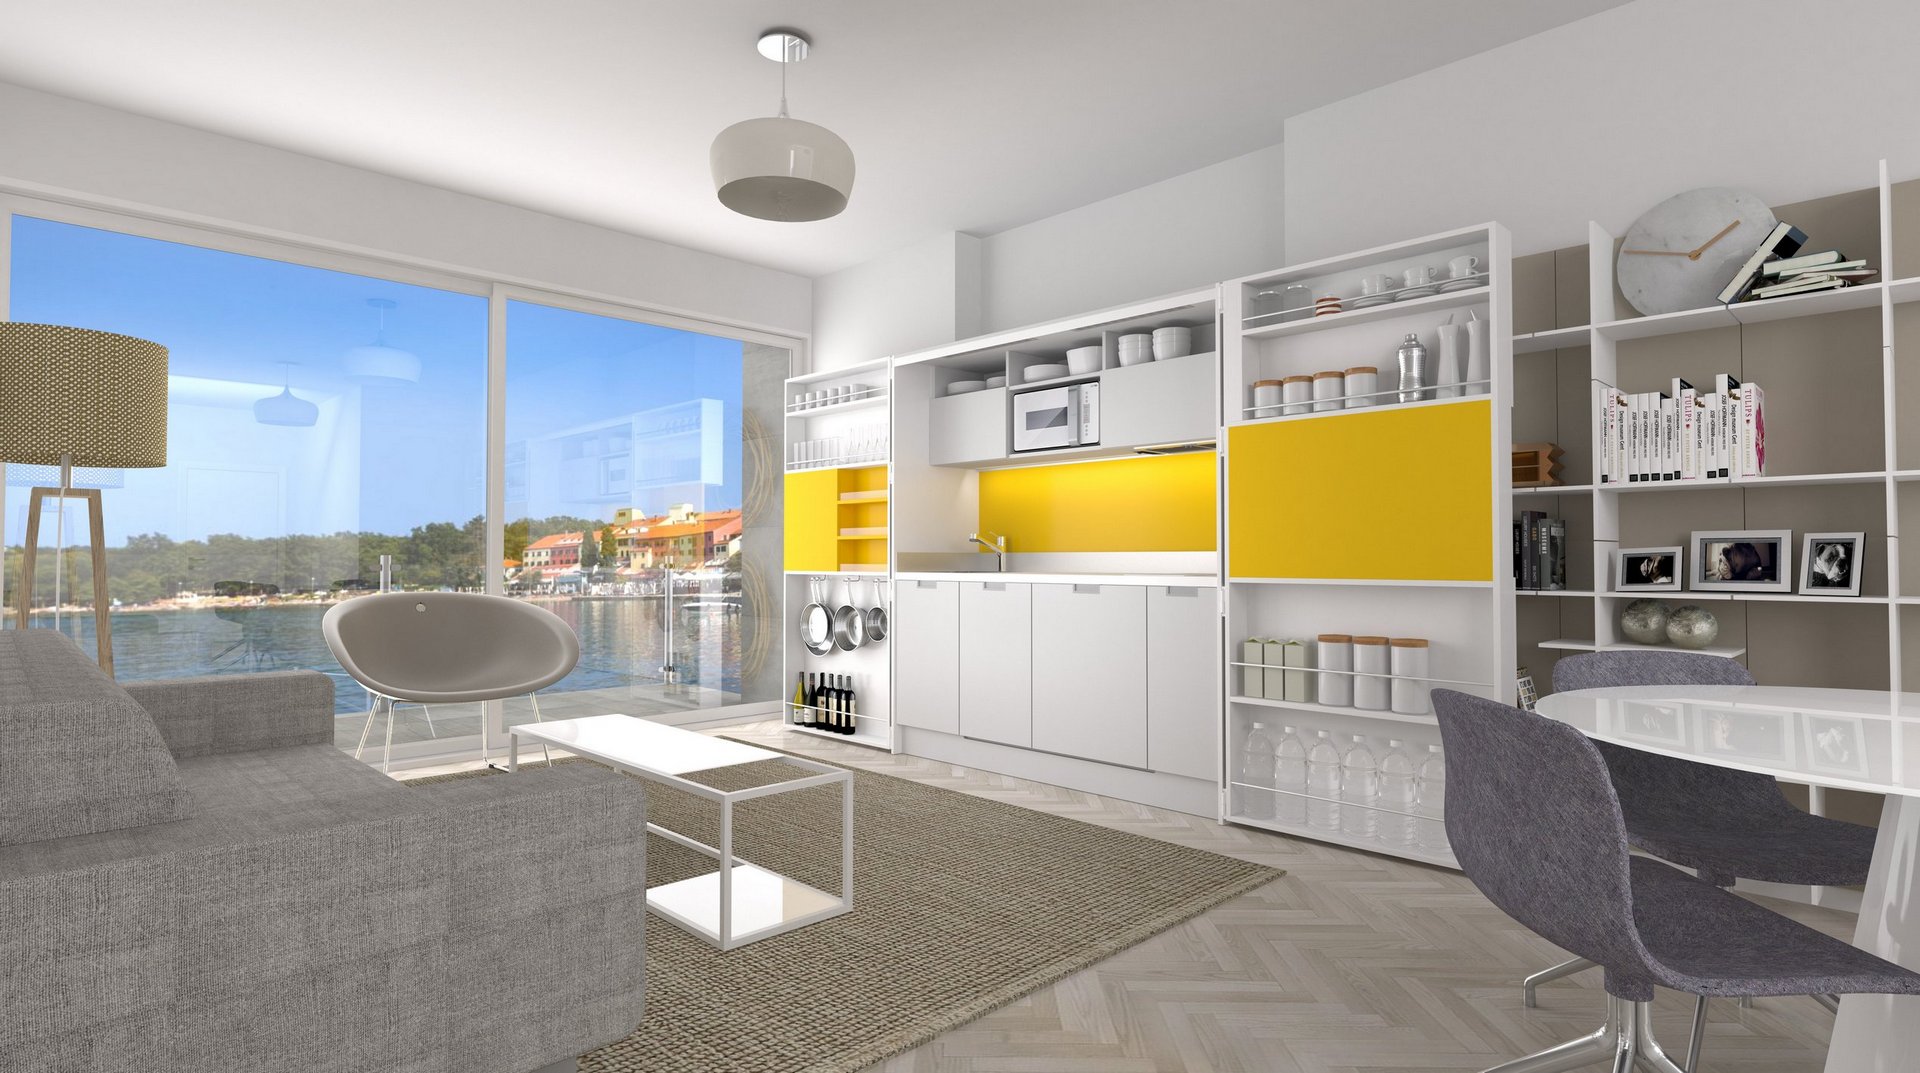 squarerooms-spaceman-compact-kitchen-3d-render-yellow-adaptable-retractable-expandable-furniture